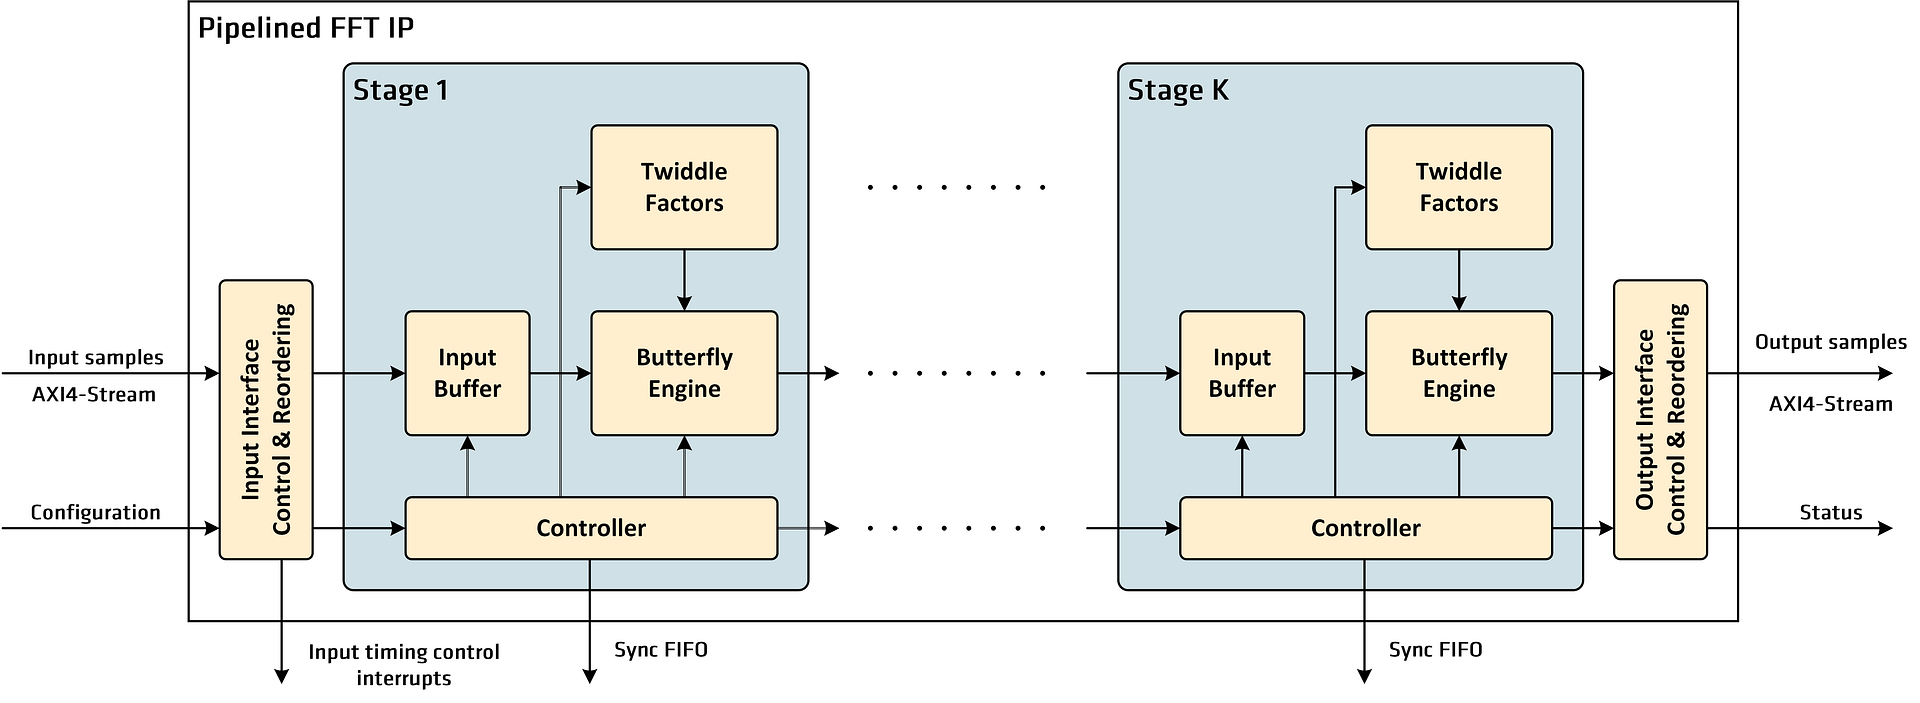 Comcores Pipelined FFT diagram